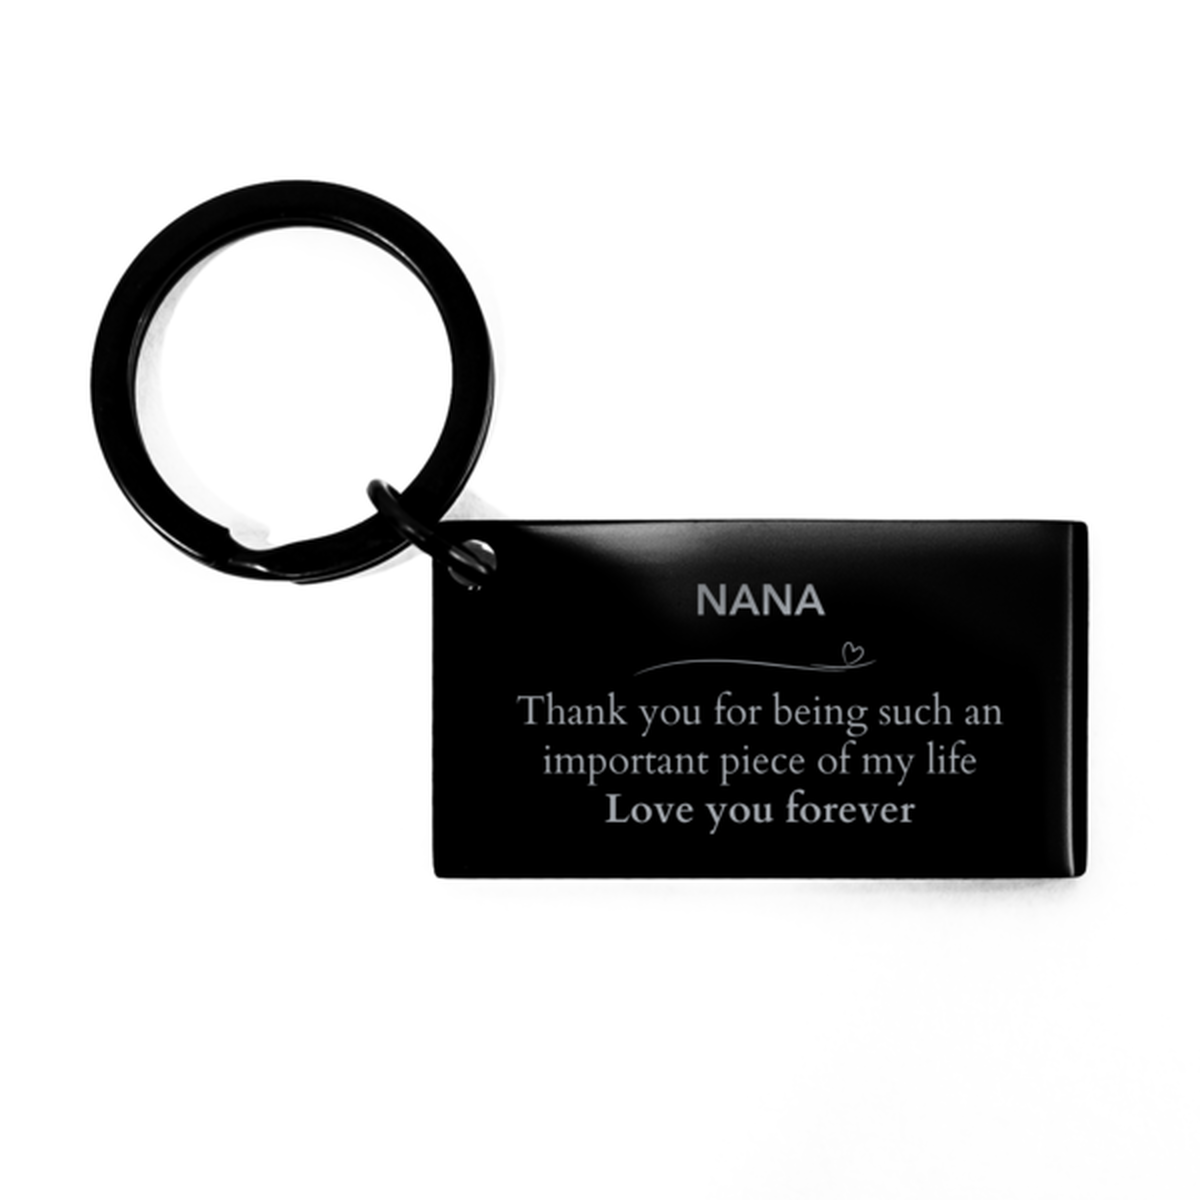 Appropriate Nana Keychain Epic Birthday Gifts for Nana Thank you for being such an important piece of my life Nana Christmas Mothers Fathers Day